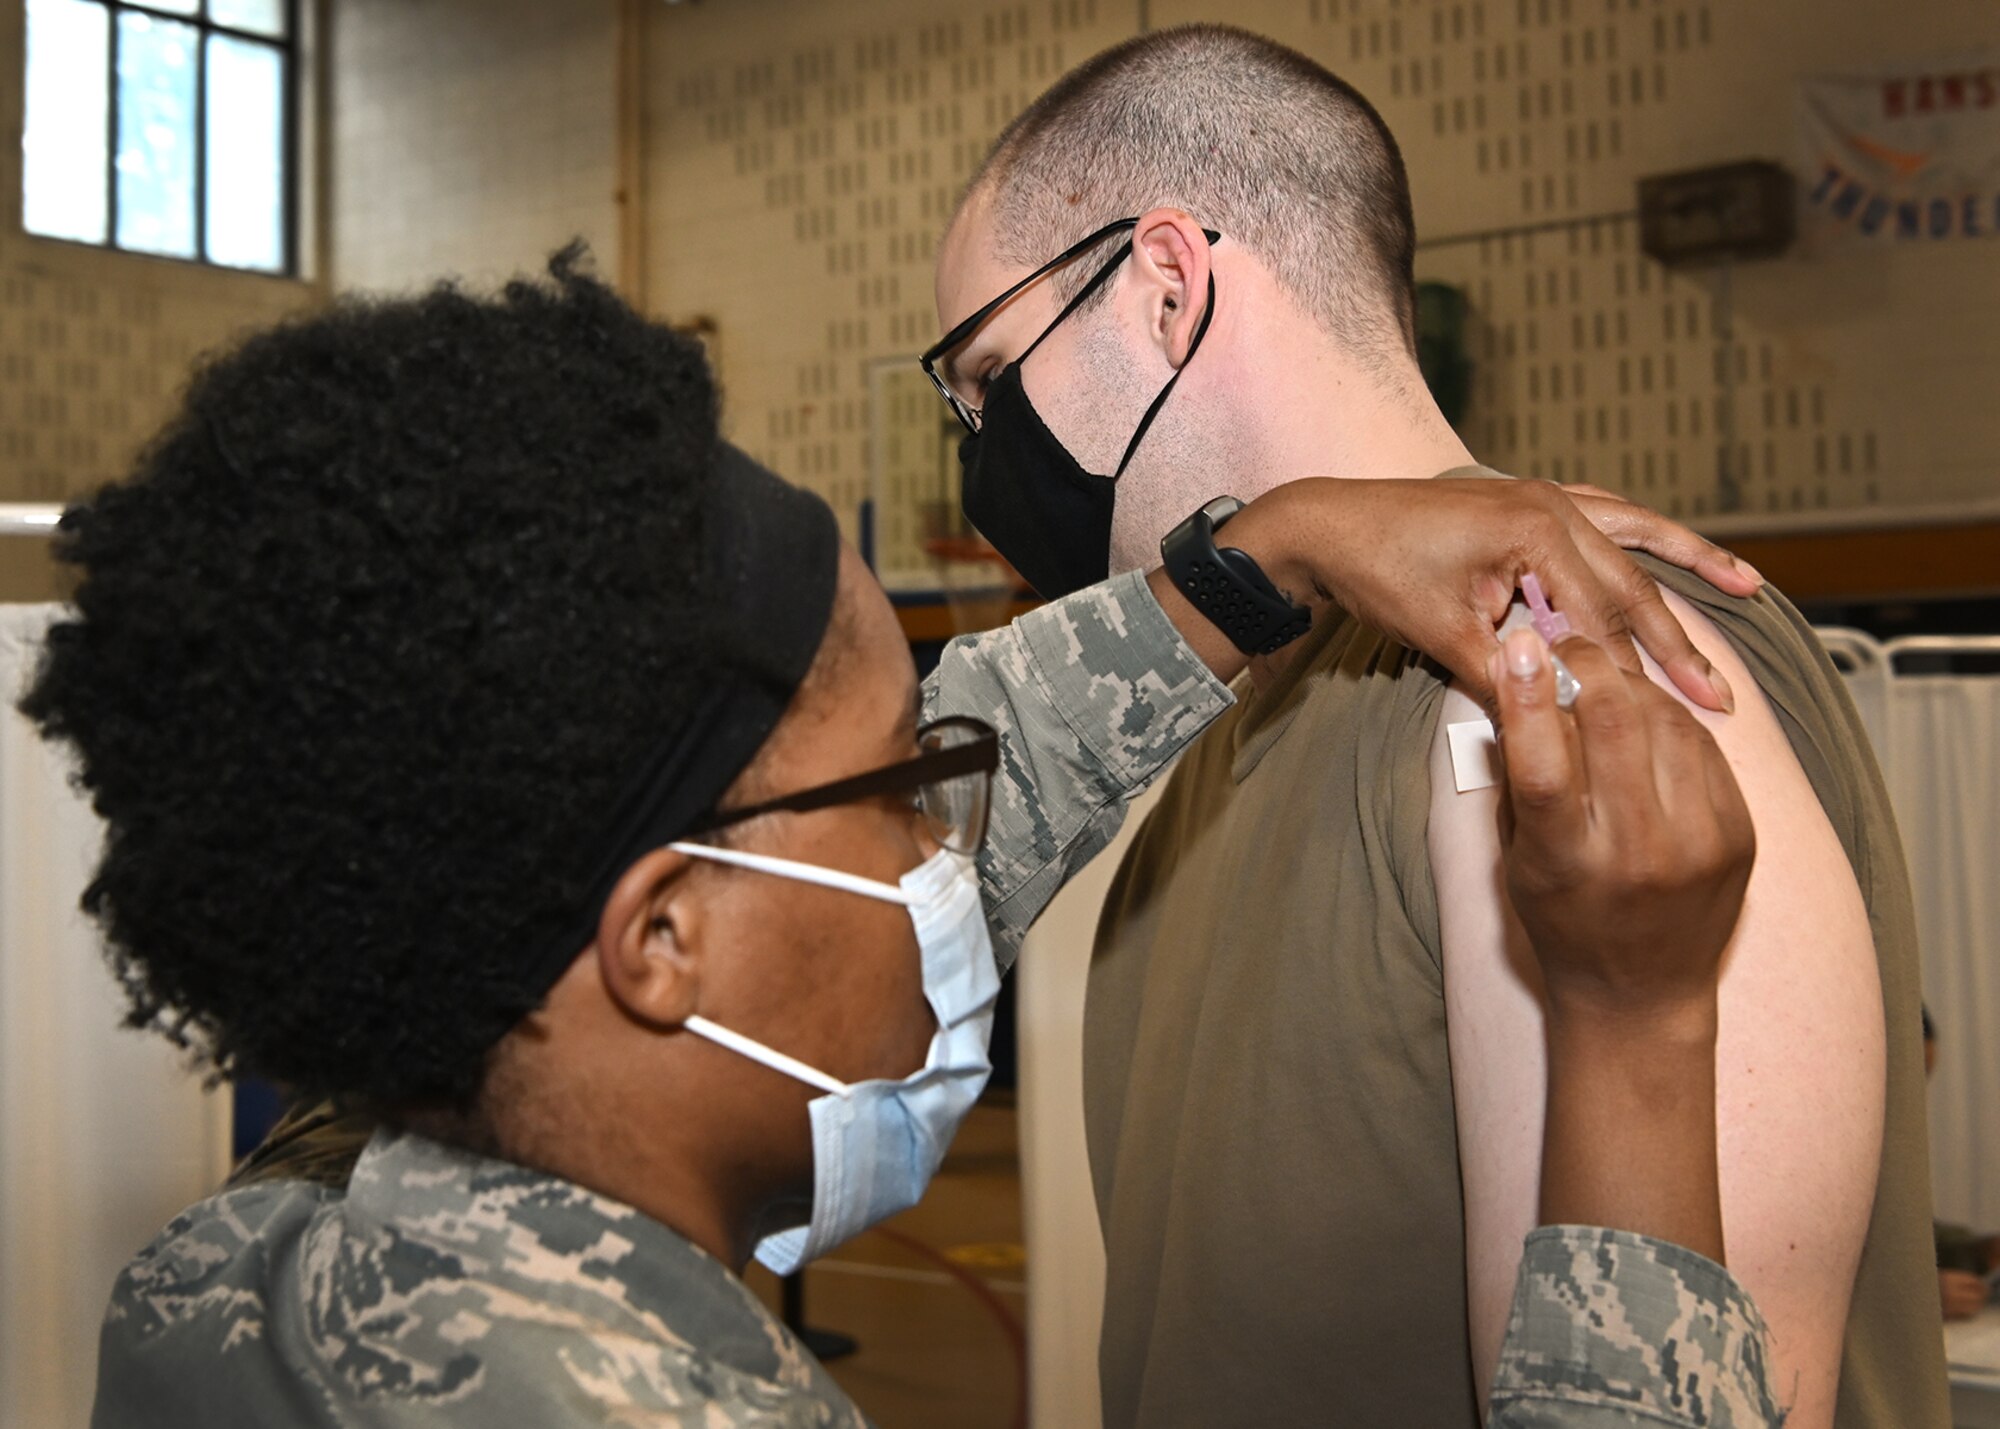 Tech. Sgt. Jordan Swaner, 66th Medical Squadron noncommissioned officer in charge of diagnostic imaging, receives a COVID-19 vaccination from Staff Sgt. Tyler Watkins, 66th Medical Squadron noncommissioned officer in charge of immunizations clinic at Hanscom Air Force Base, Mass., Jan. 14. (U.S. Air Force photo by Todd Maki)